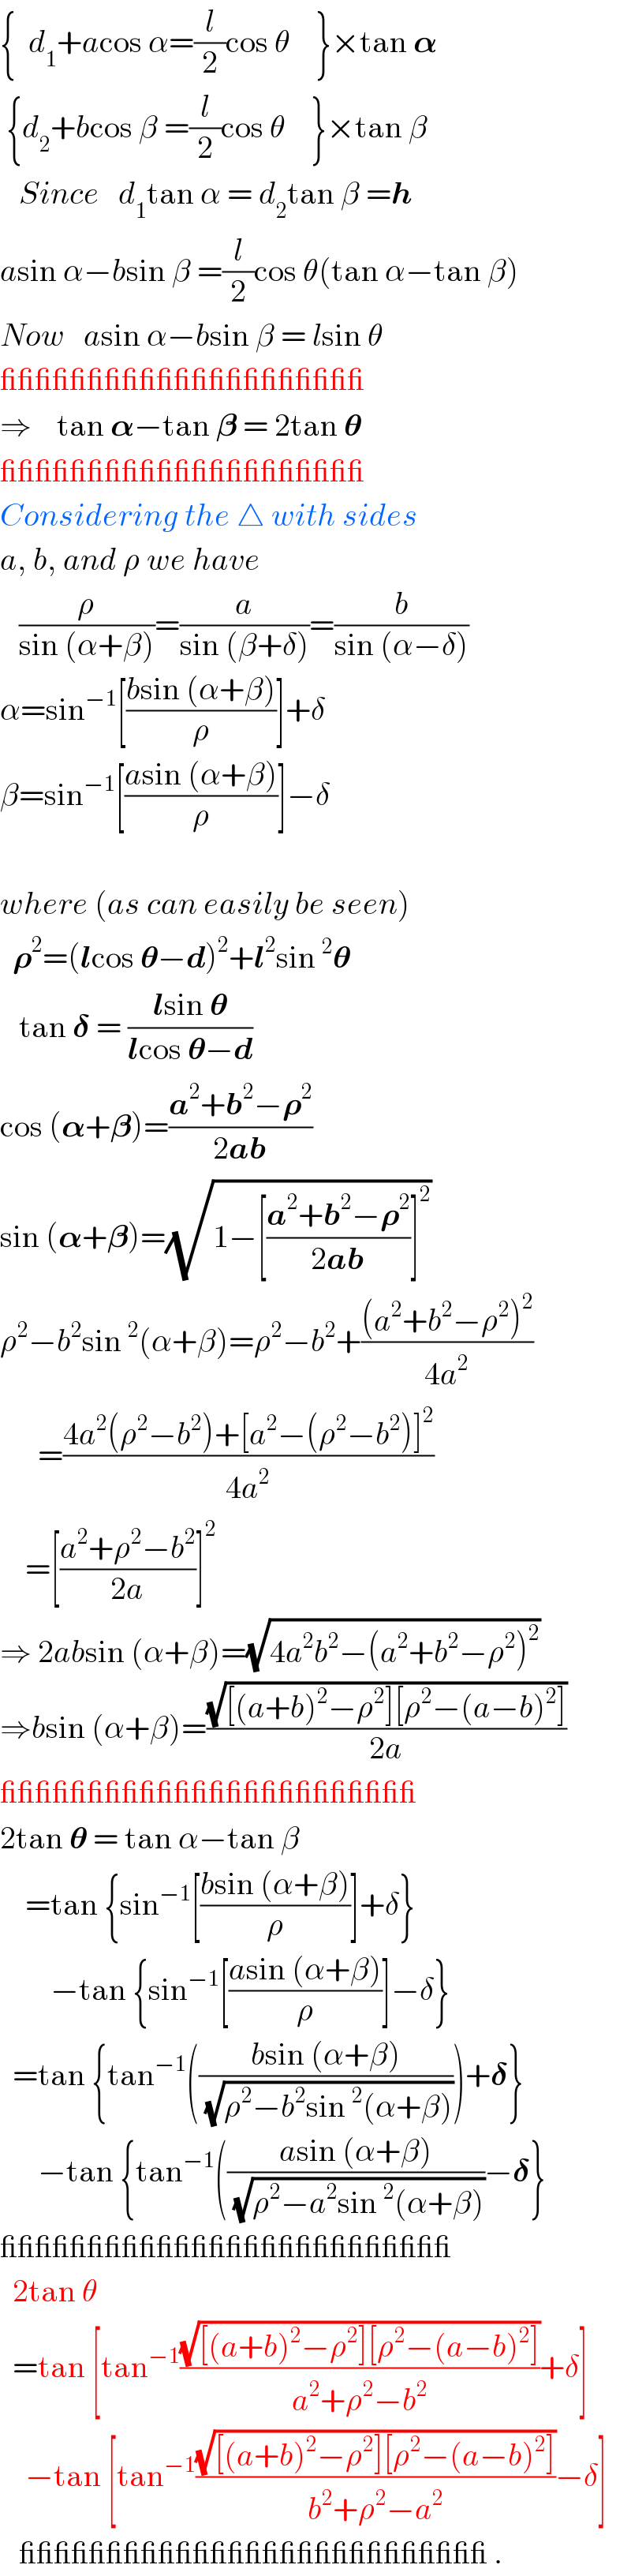 {  d_1 +acos α=(l/2)cos θ    }×tan 𝛂   {d_2 +bcos β =(l/2)cos θ    }×tan β     Since   d_1 tan α = d_2 tan β =h  asin α−bsin β =(l/2)cos θ(tan α−tan β)  Now   asin α−bsin β = lsin θ  _____________________  ⇒    tan 𝛂−tan 𝛃 = 2tan 𝛉  _____________________  Considering the △ with sides  a, b, and ρ we have      (ρ/(sin (α+β)))=(a/(sin (β+δ)))=(b/(sin (α−δ)))  α=sin^(−1) [((bsin (α+β))/ρ)]+δ  β=sin^(−1) [((asin (α+β))/ρ)]−δ    where (as can easily be seen)    𝛒^2 =(lcos 𝛉−d)^2 +l^2 sin^2 𝛉     tan 𝛅 = ((lsin 𝛉)/(lcos 𝛉−d))  cos (𝛂+𝛃)=((a^2 +b^2 −𝛒^2 )/(2ab))  sin (𝛂+𝛃)=(√(1−[((a^2 +b^2 −𝛒^2 )/(2ab))]^2 ))   ρ^2 −b^2 sin^2 (α+β)=ρ^2 −b^2 +(((a^2 +b^2 −ρ^2 )^2 )/(4a^2 ))        =((4a^2 (ρ^2 −b^2 )+[a^2 −(ρ^2 −b^2 )]^2 )/(4a^2 ))      =[((a^2 +ρ^2 −b^2 )/(2a))]^2   ⇒ 2absin (α+β)=(√(4a^2 b^2 −(a^2 +b^2 −ρ^2 )^2 ))  ⇒bsin (α+β)=((√([(a+b)^2 −ρ^2 ][ρ^2 −(a−b)^2 ]))/(2a))  ________________________  2tan 𝛉 = tan α−tan β      =tan {sin^(−1) [((bsin (α+β))/ρ)]+δ}          −tan {sin^(−1) [((asin (α+β))/ρ)]−δ}    =tan {tan^(−1) (((bsin (α+β))/(√(ρ^2 −b^2 sin^2 (α+β)))))+𝛅}        −tan {tan^(−1) (((asin (α+β))/(√(ρ^2 −a^2 sin^2 (α+β))))−𝛅}  __________________________    2tan θ     =tan [tan^(−1) ((√([(a+b)^2 −ρ^2 ][ρ^2 −(a−b)^2 ]))/(a^2 +ρ^2 −b^2 ))+δ]      −tan [tan^(−1) ((√([(a+b)^2 −ρ^2 ][ρ^2 −(a−b)^2 ]))/(b^2 +ρ^2 −a^2 ))−δ]      ___________________________ .  